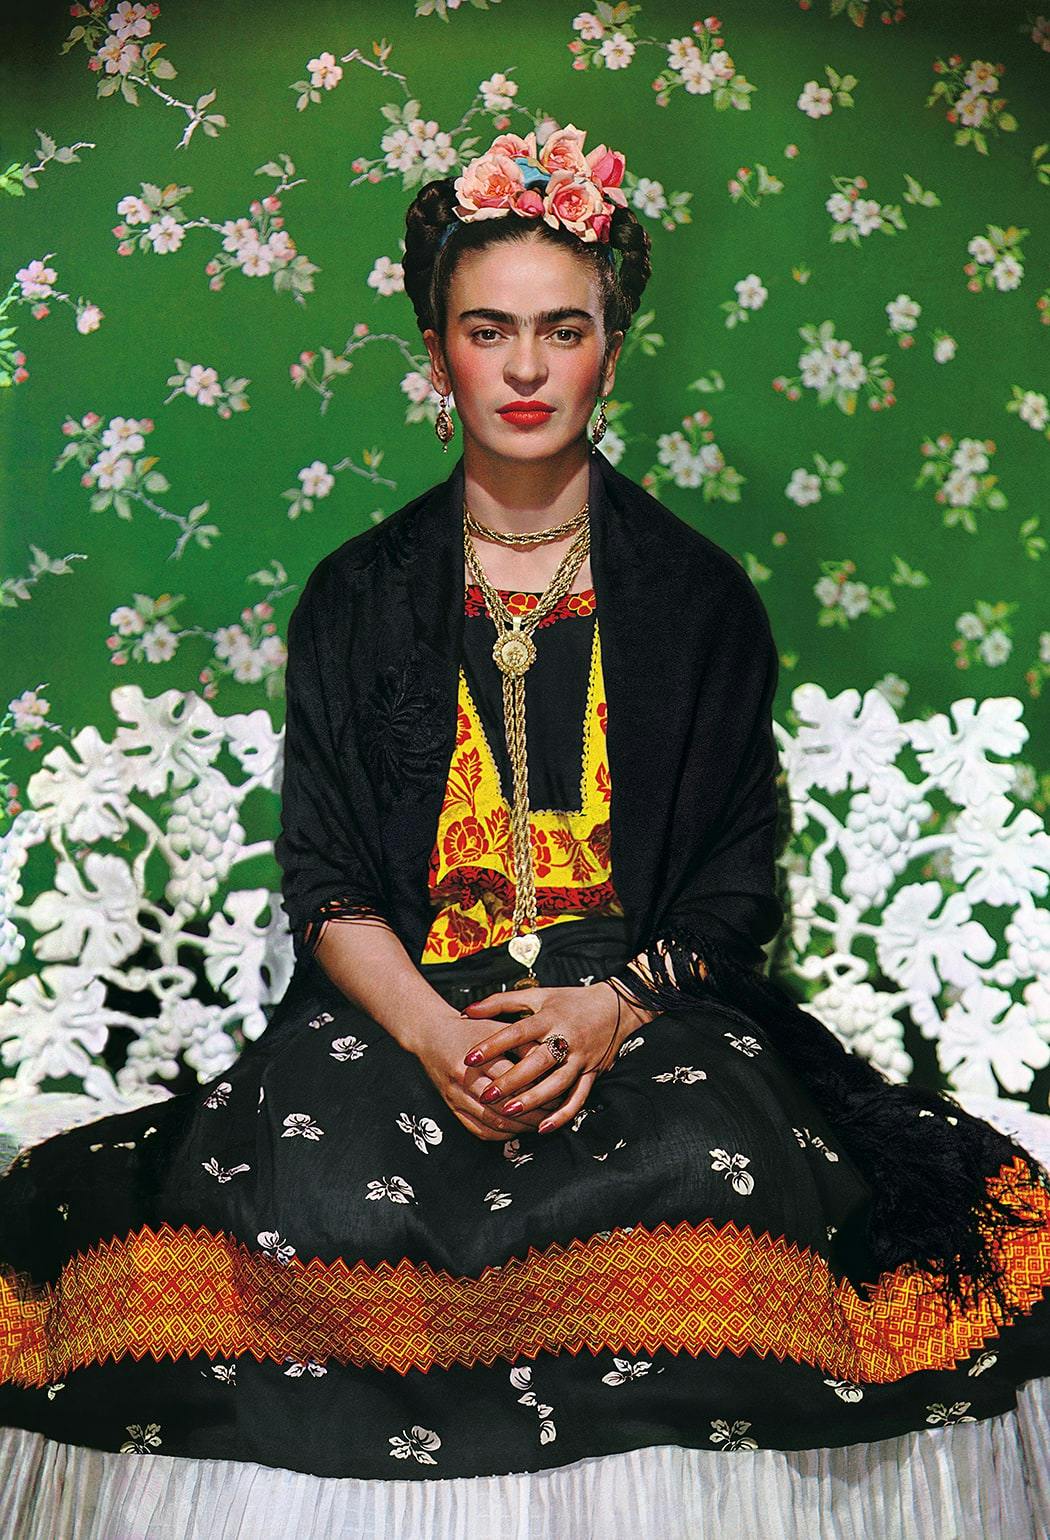 <p>Nickolas Murray<br />
"Frida on Bench"<br />
Nickolas Murry Photo Archives<br />
Image courtesy of the Fine Arts Museums of San Francisco</p>
